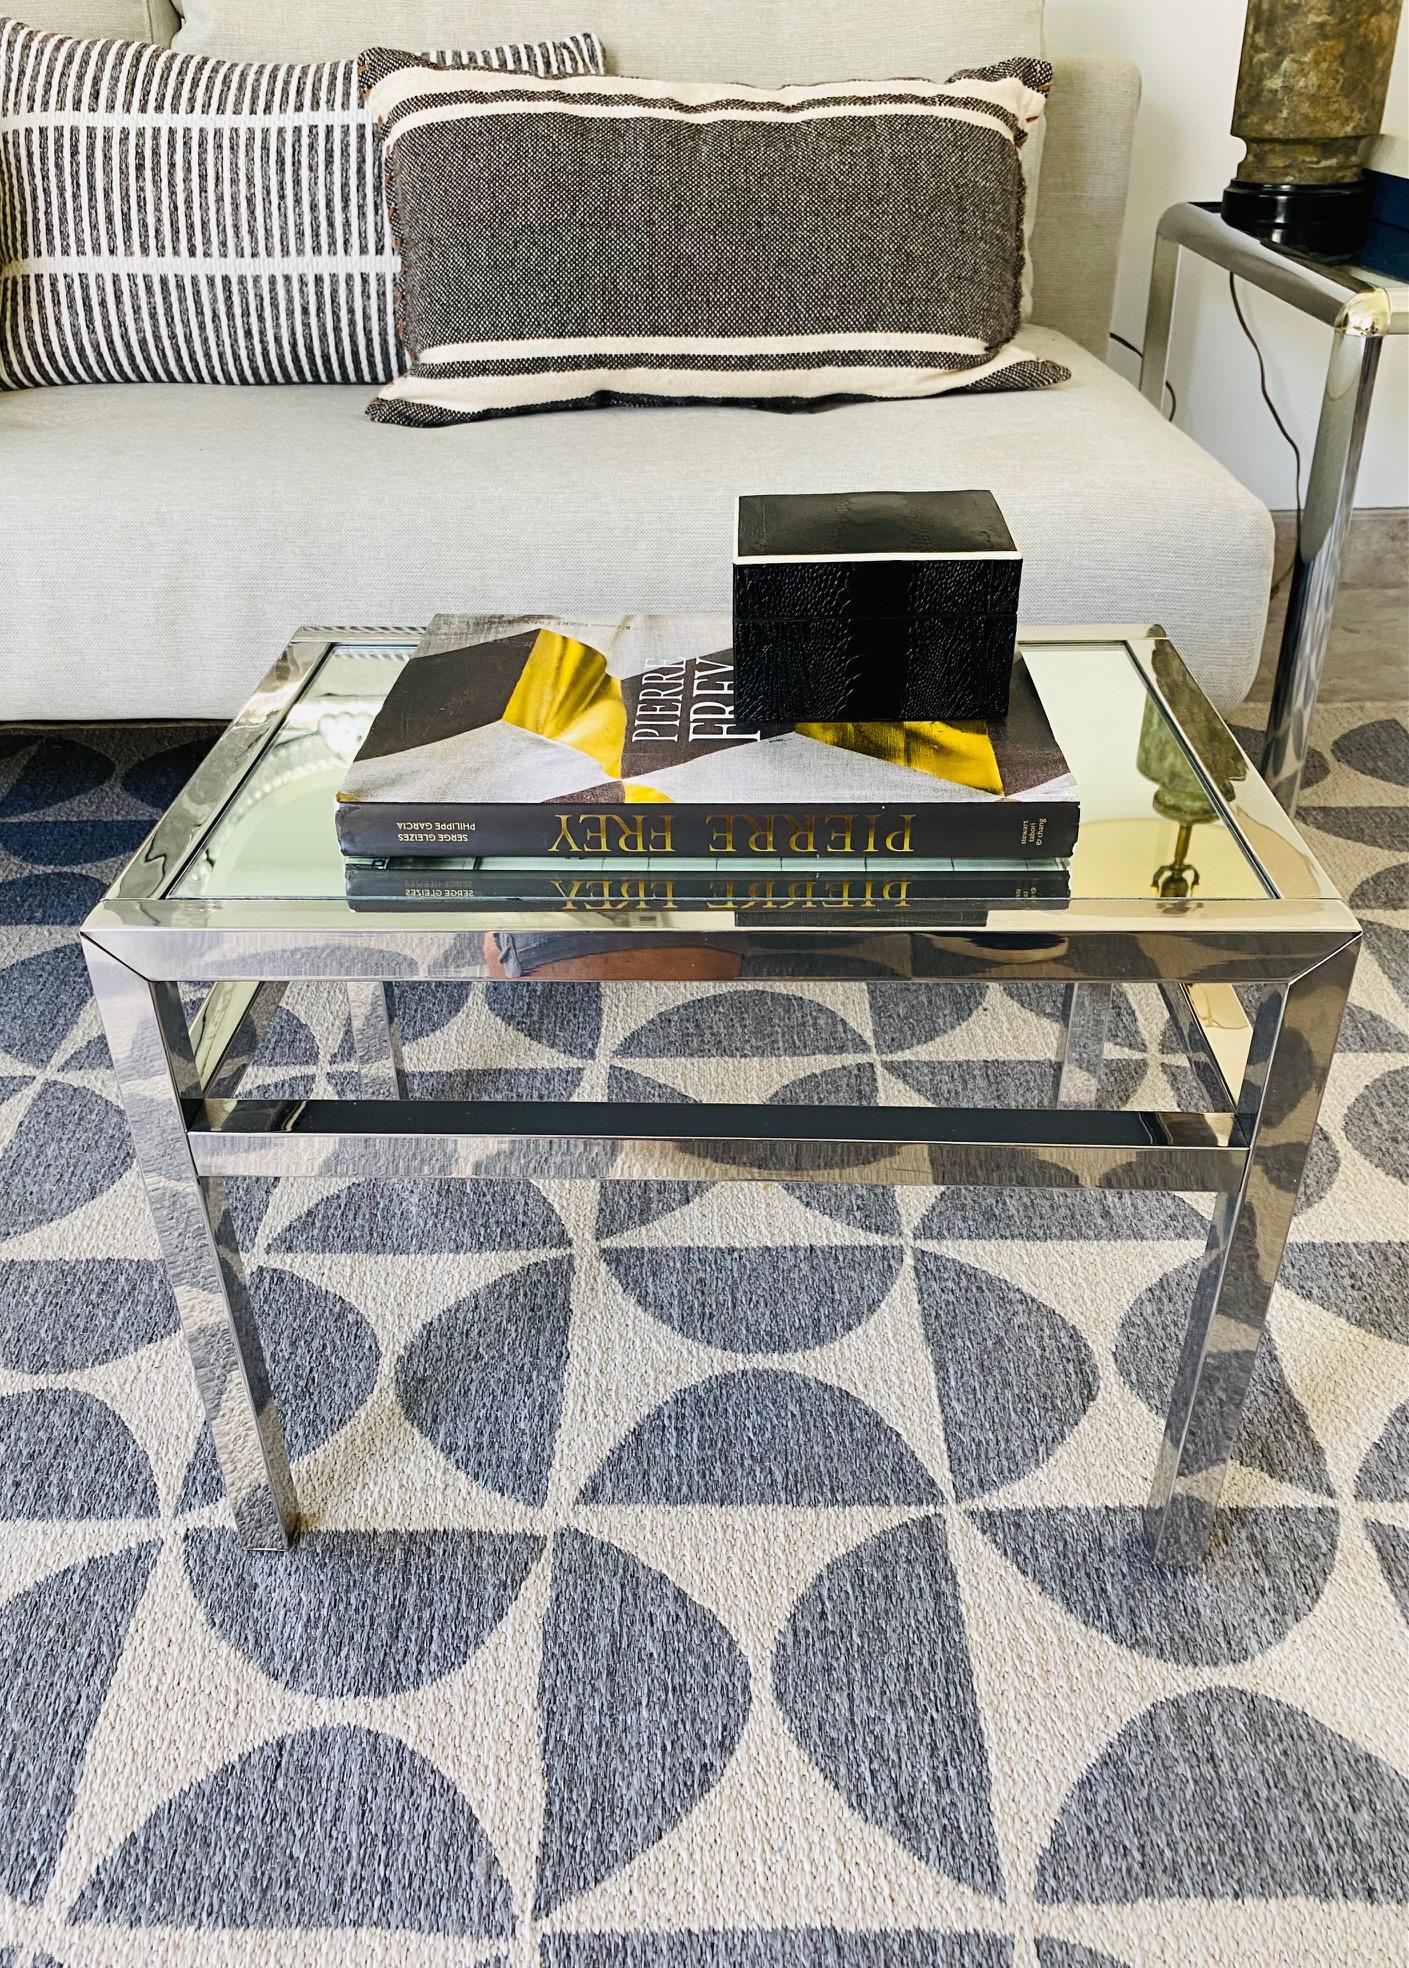 Pair of Chrome and Mirrored Side Tables in the style of Milo Baughman, c. 1970's In Good Condition For Sale In Fort Lauderdale, FL